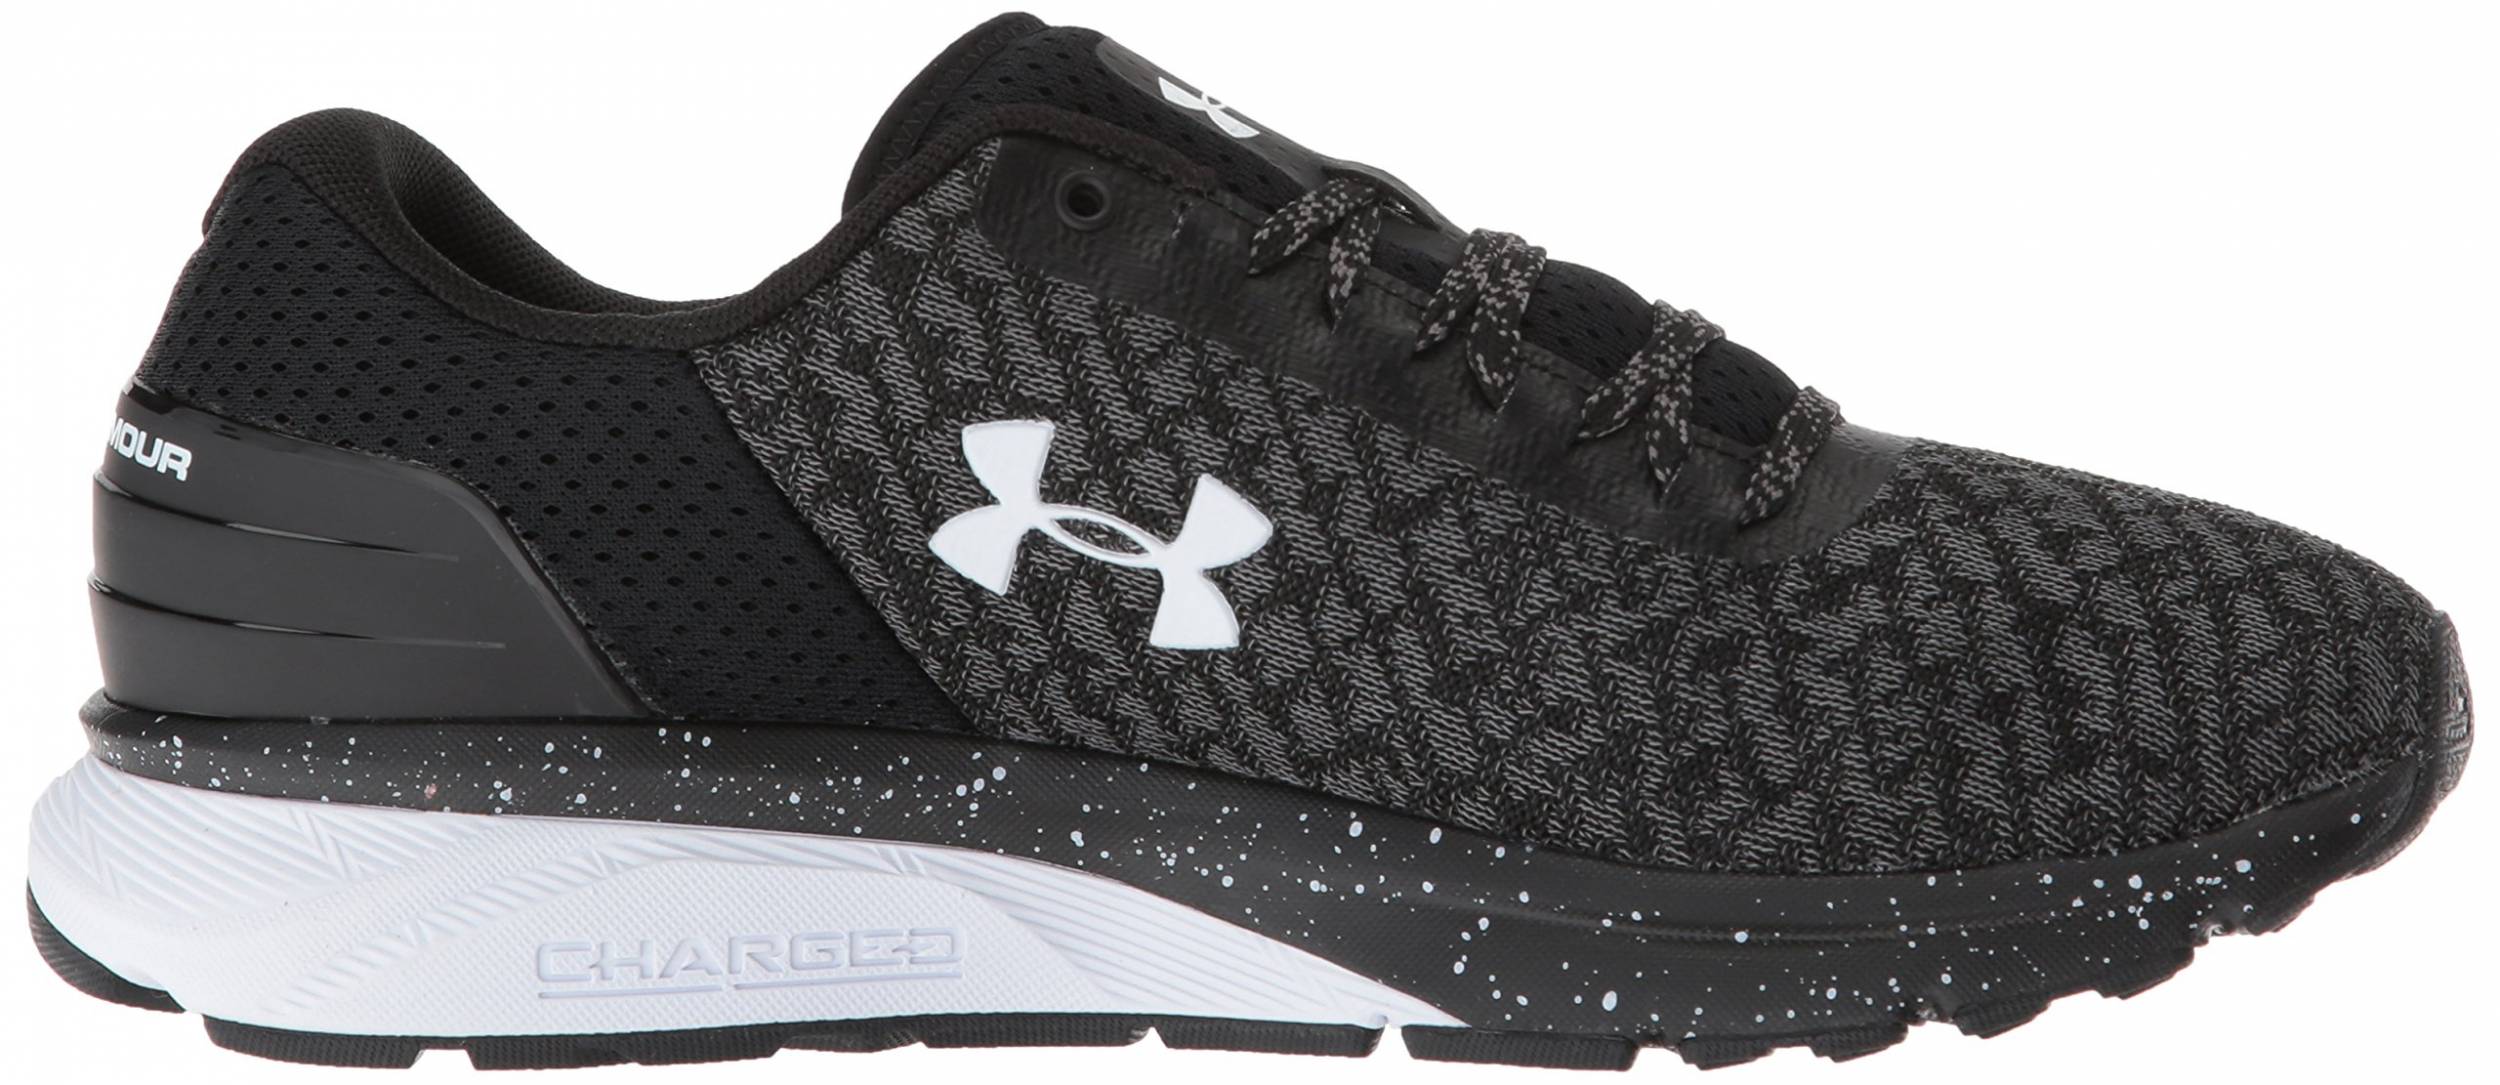 Under Armour Mens Charged Escape 2 Running Shoes Trainers Sneakers Black Sports 